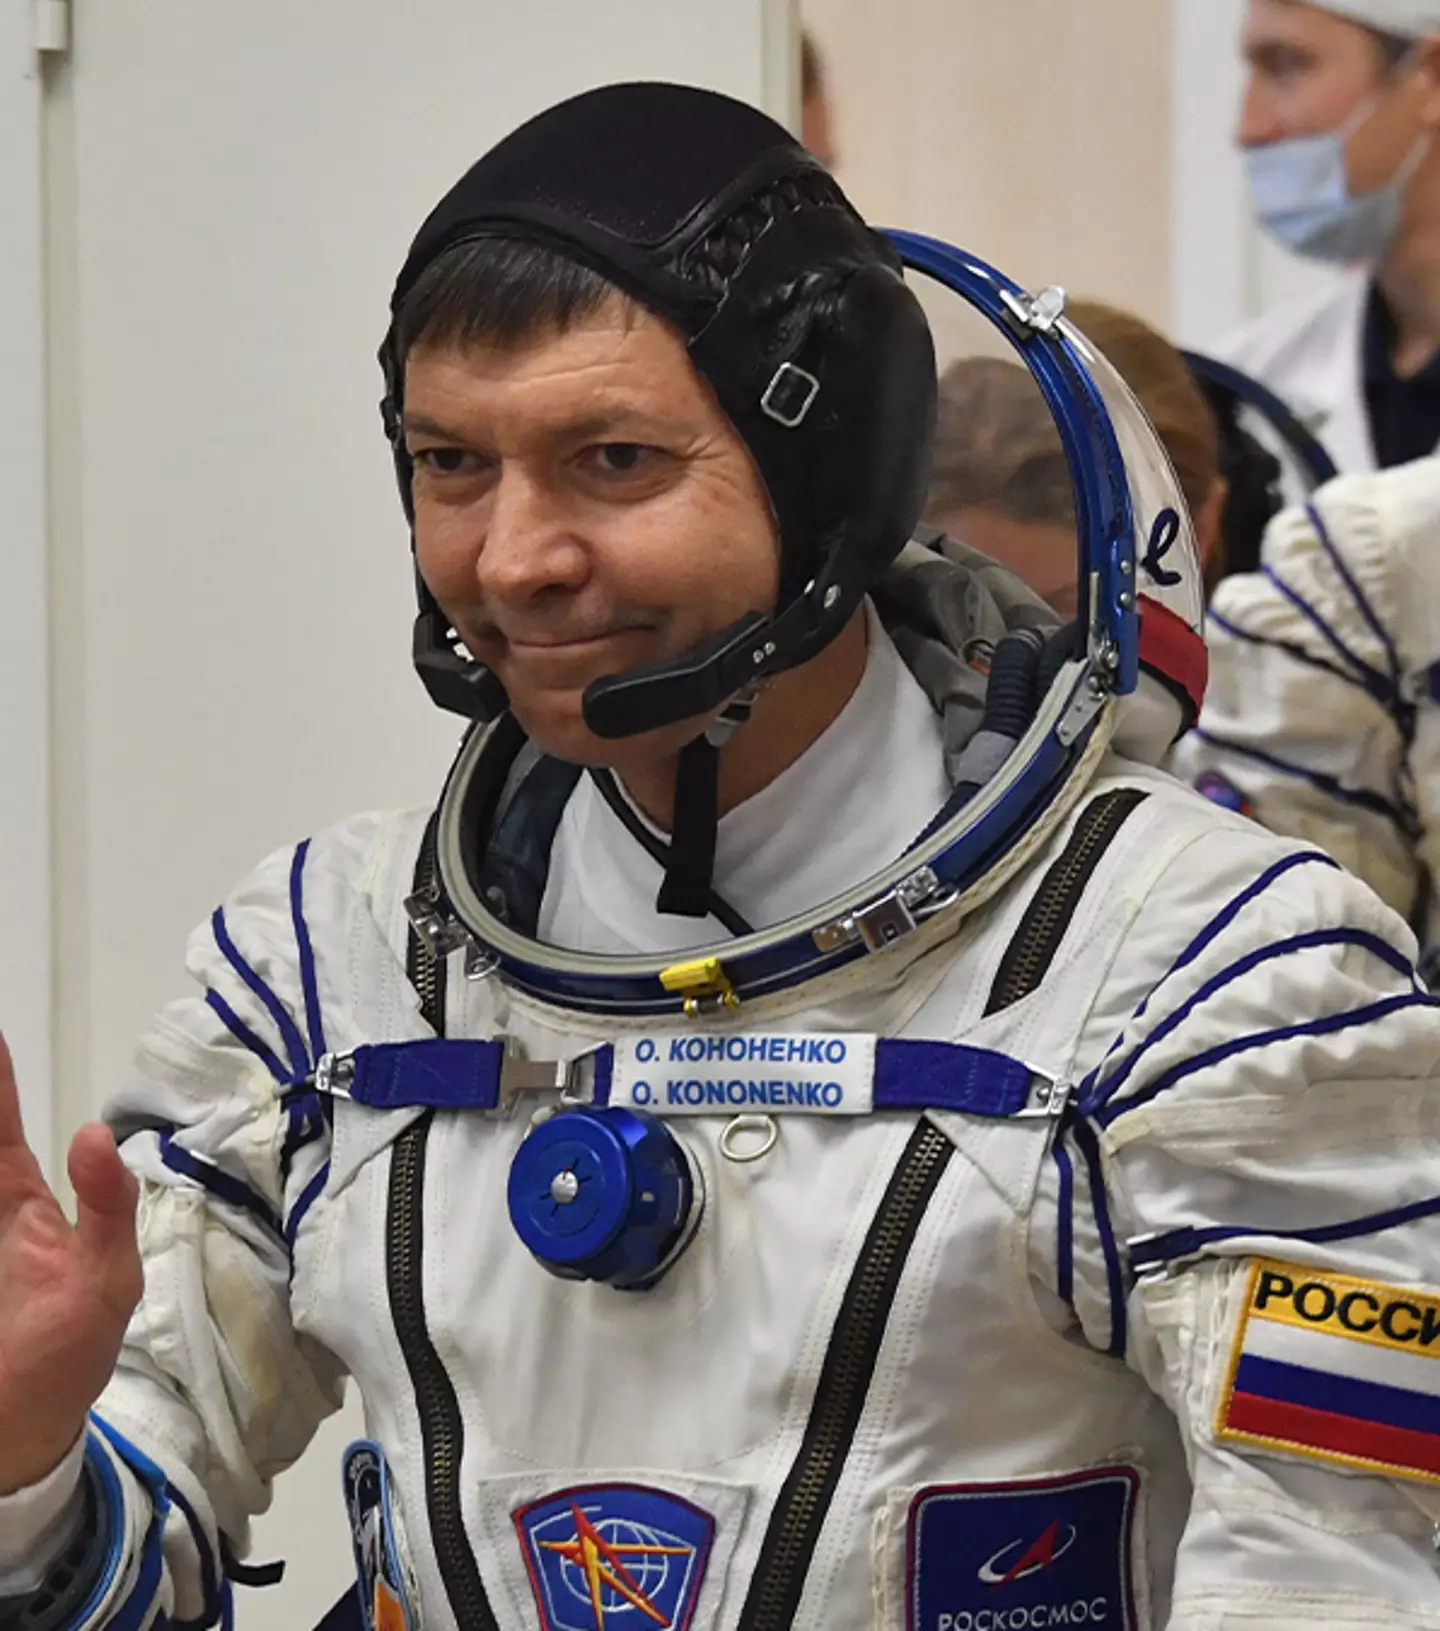 Russian cosmonaut Oleg Kononenko set a new record for the most time spent in space /VYACHESLAV OSELEDKO / Contributor / Getty